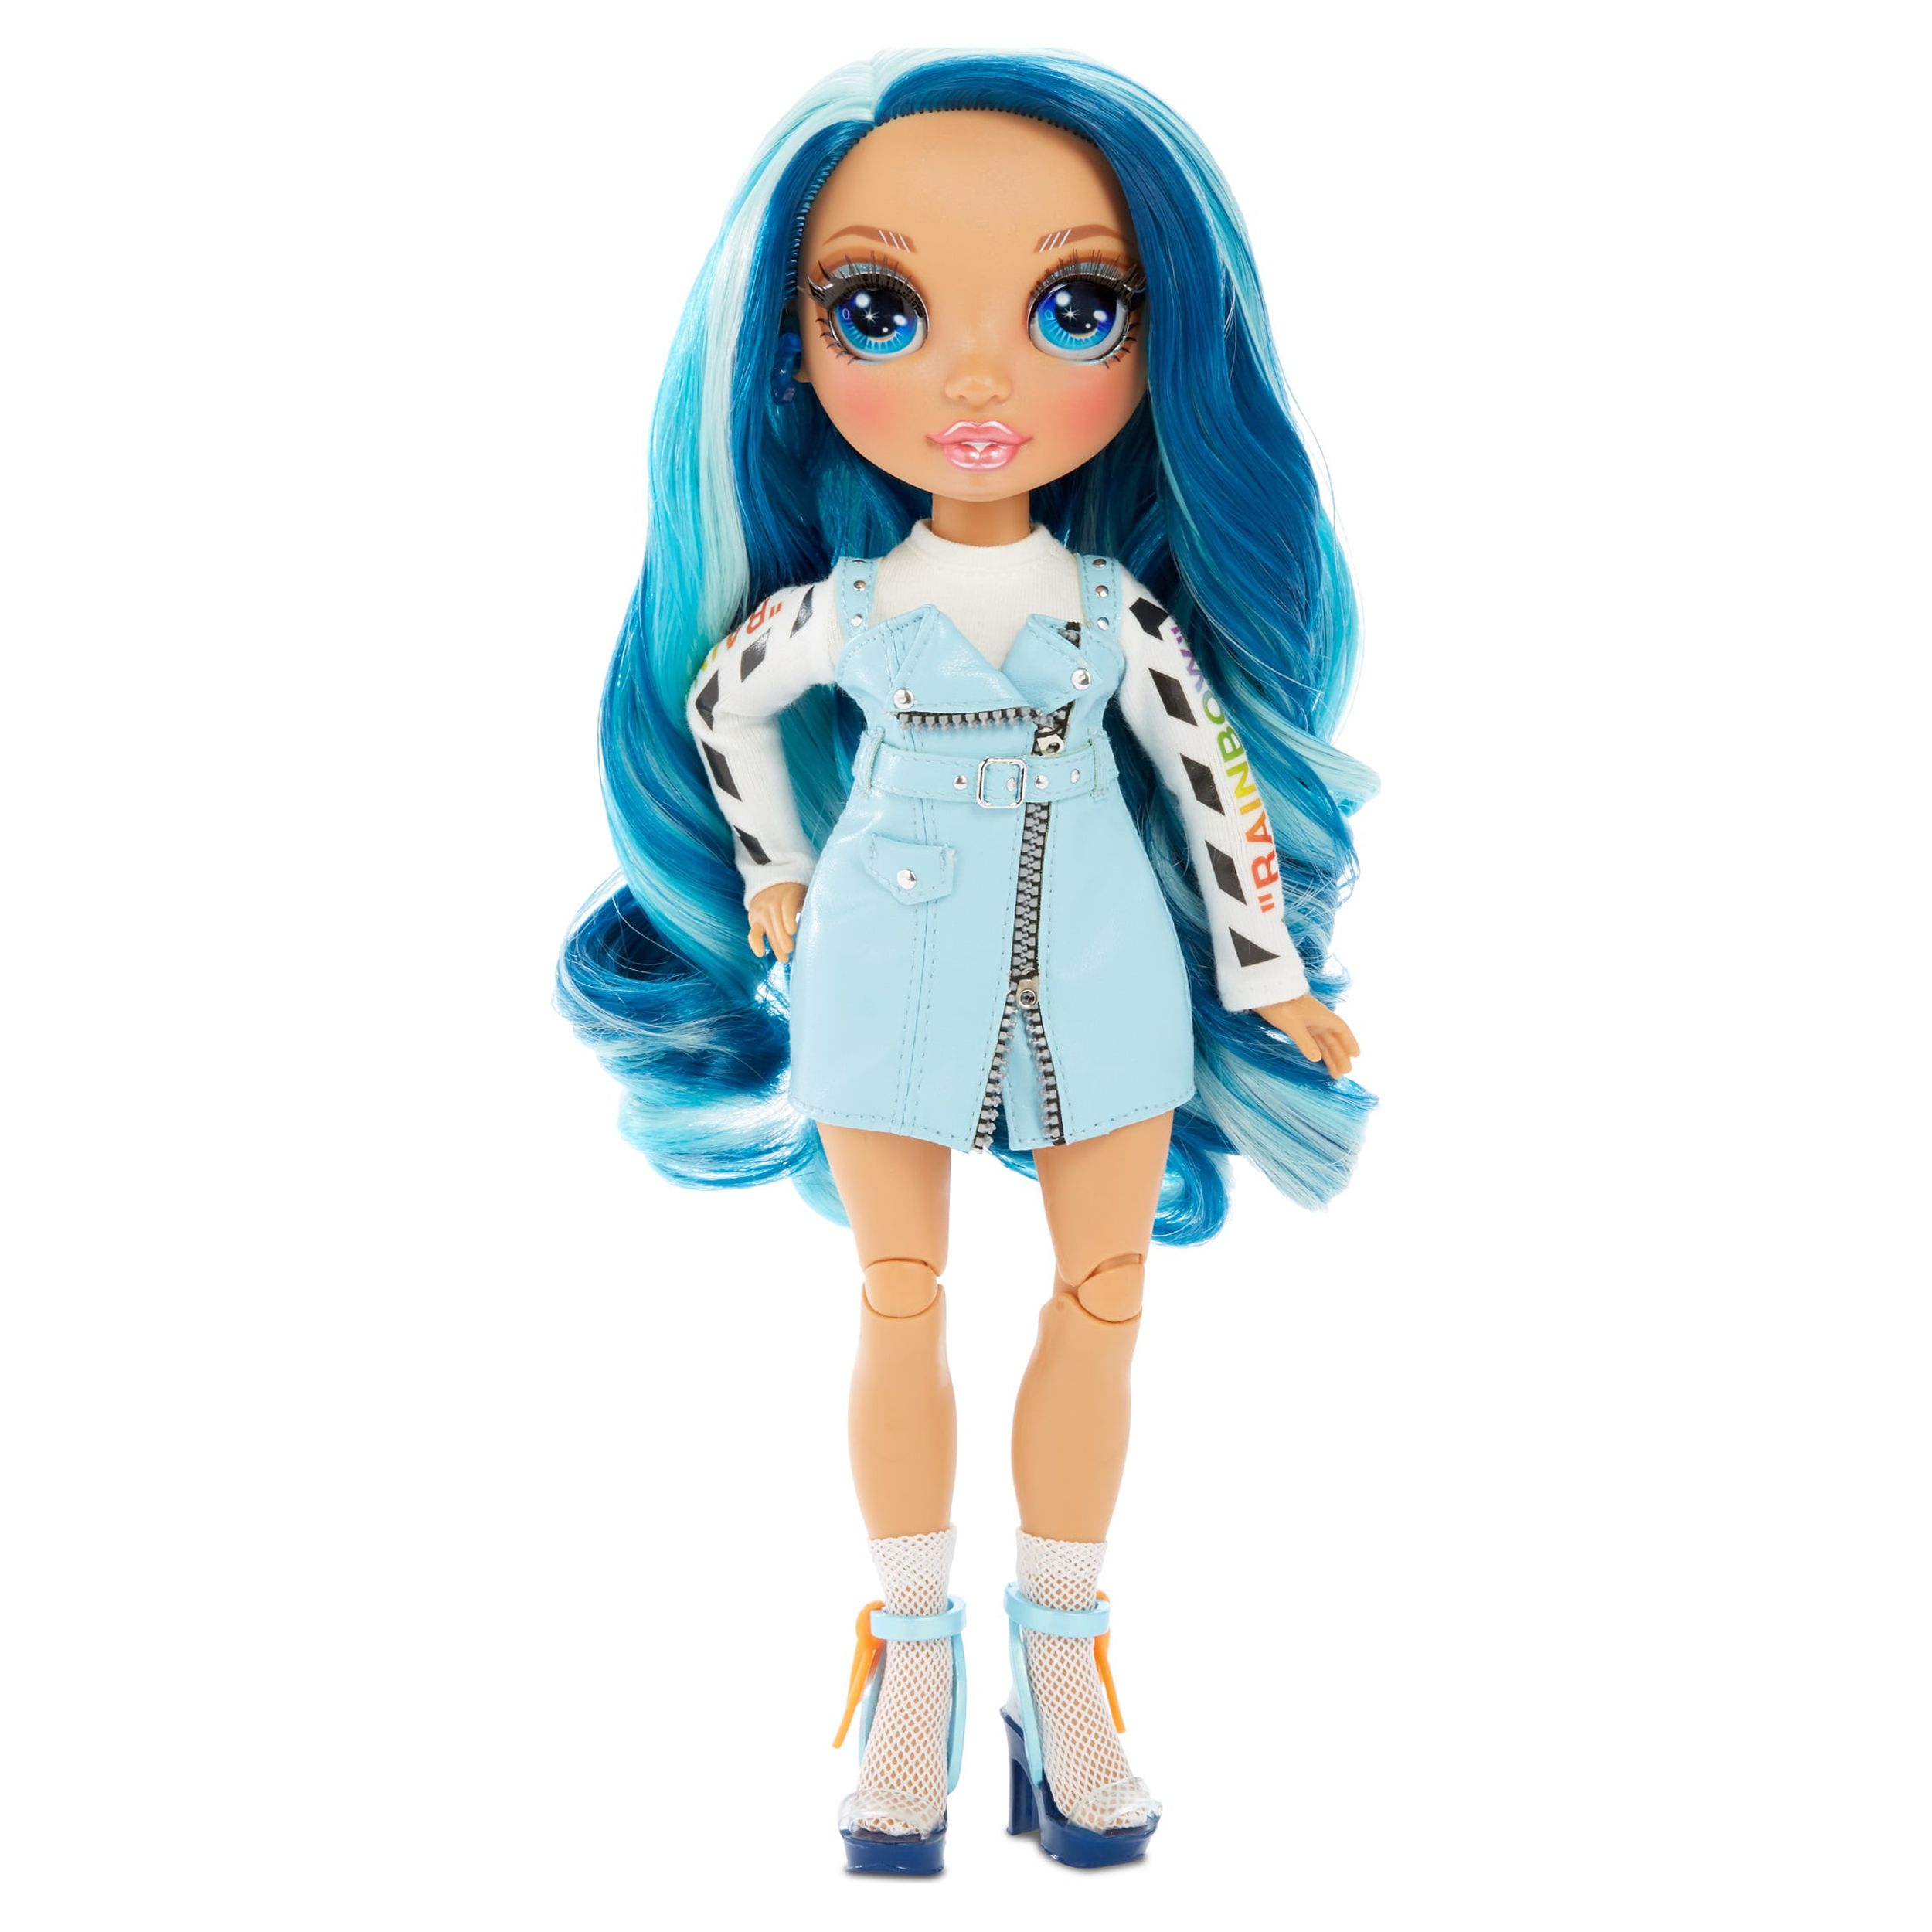 Rainbow High Skyler Bradshaw – Blue Fashion Doll with 2 Outfits - image 1 of 8